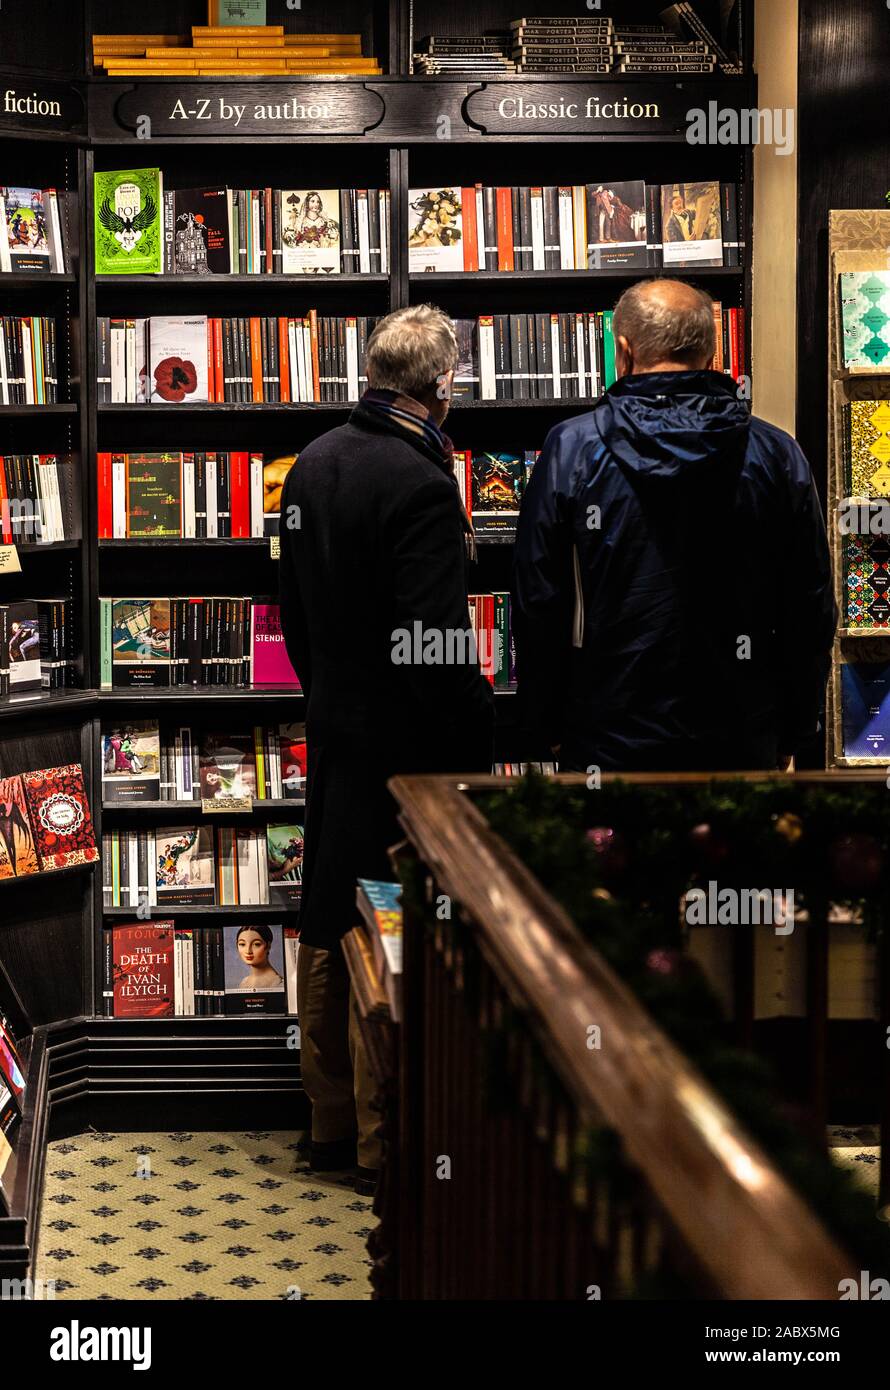 Rear view portrait of two men standing side by side in front of a 'classic fiction' bookshelf, Hatchards bookshop, London, England, UK. Stock Photo